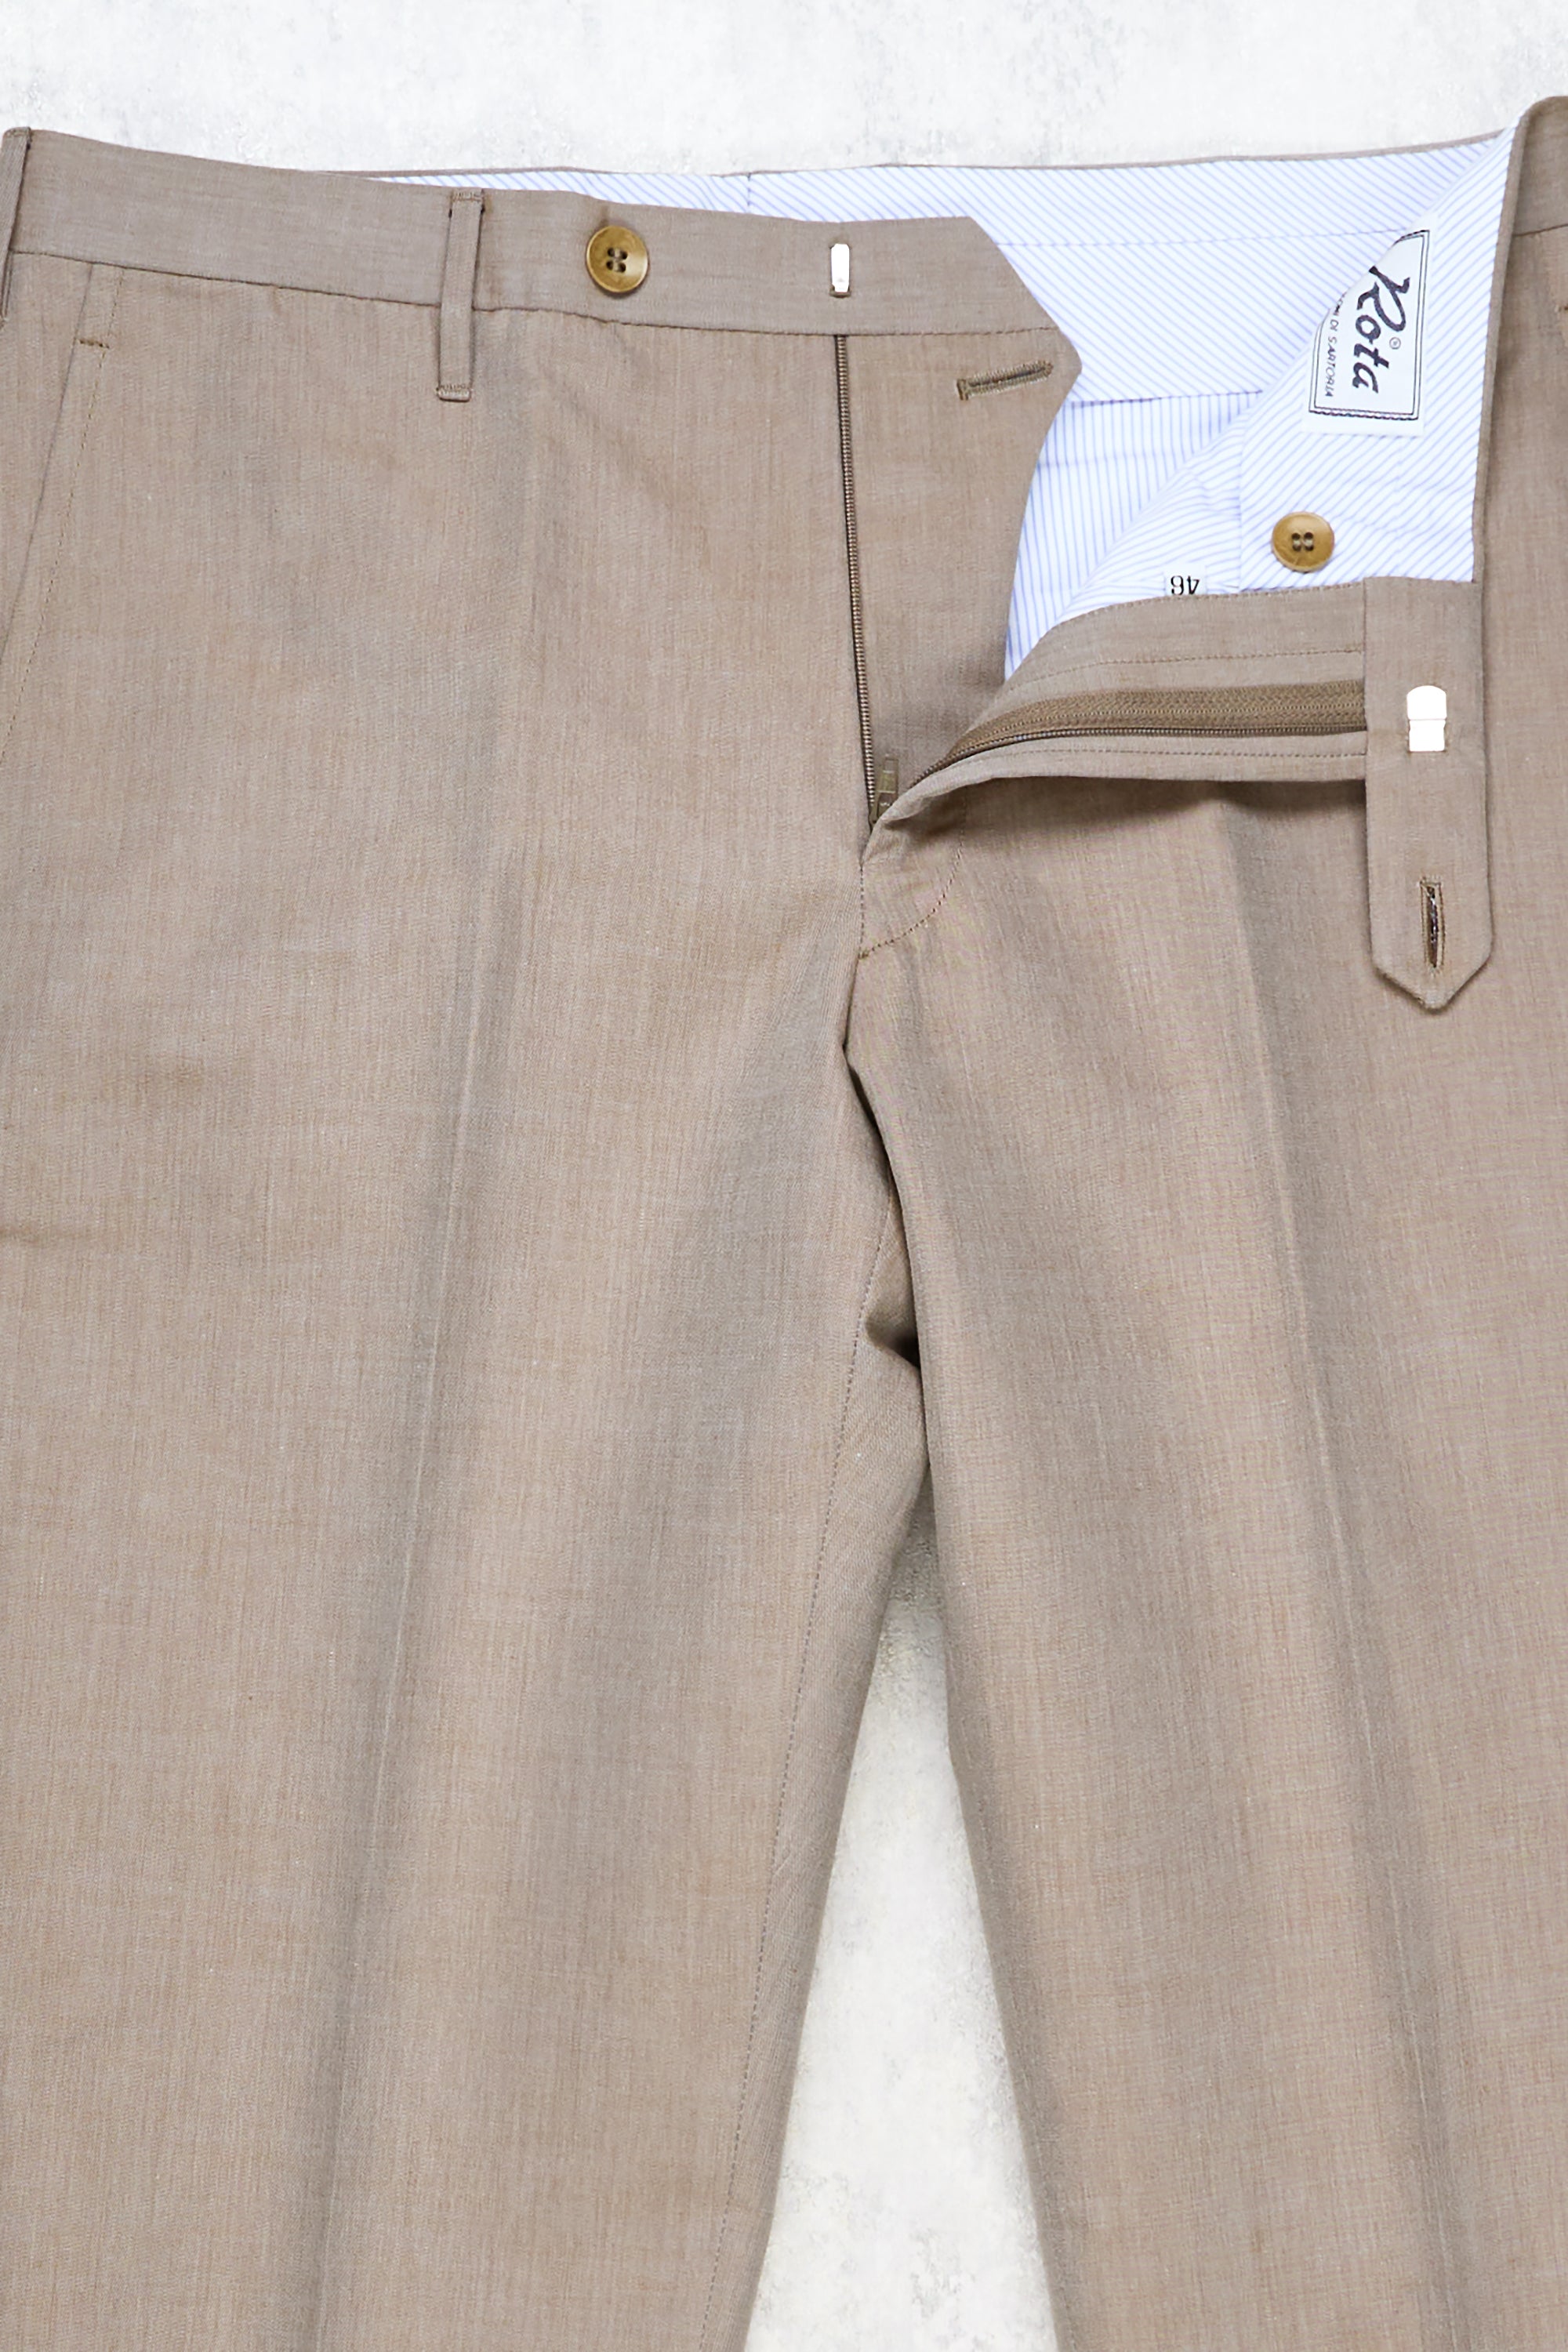 Rota	290/2 Brown Cotton Trousers